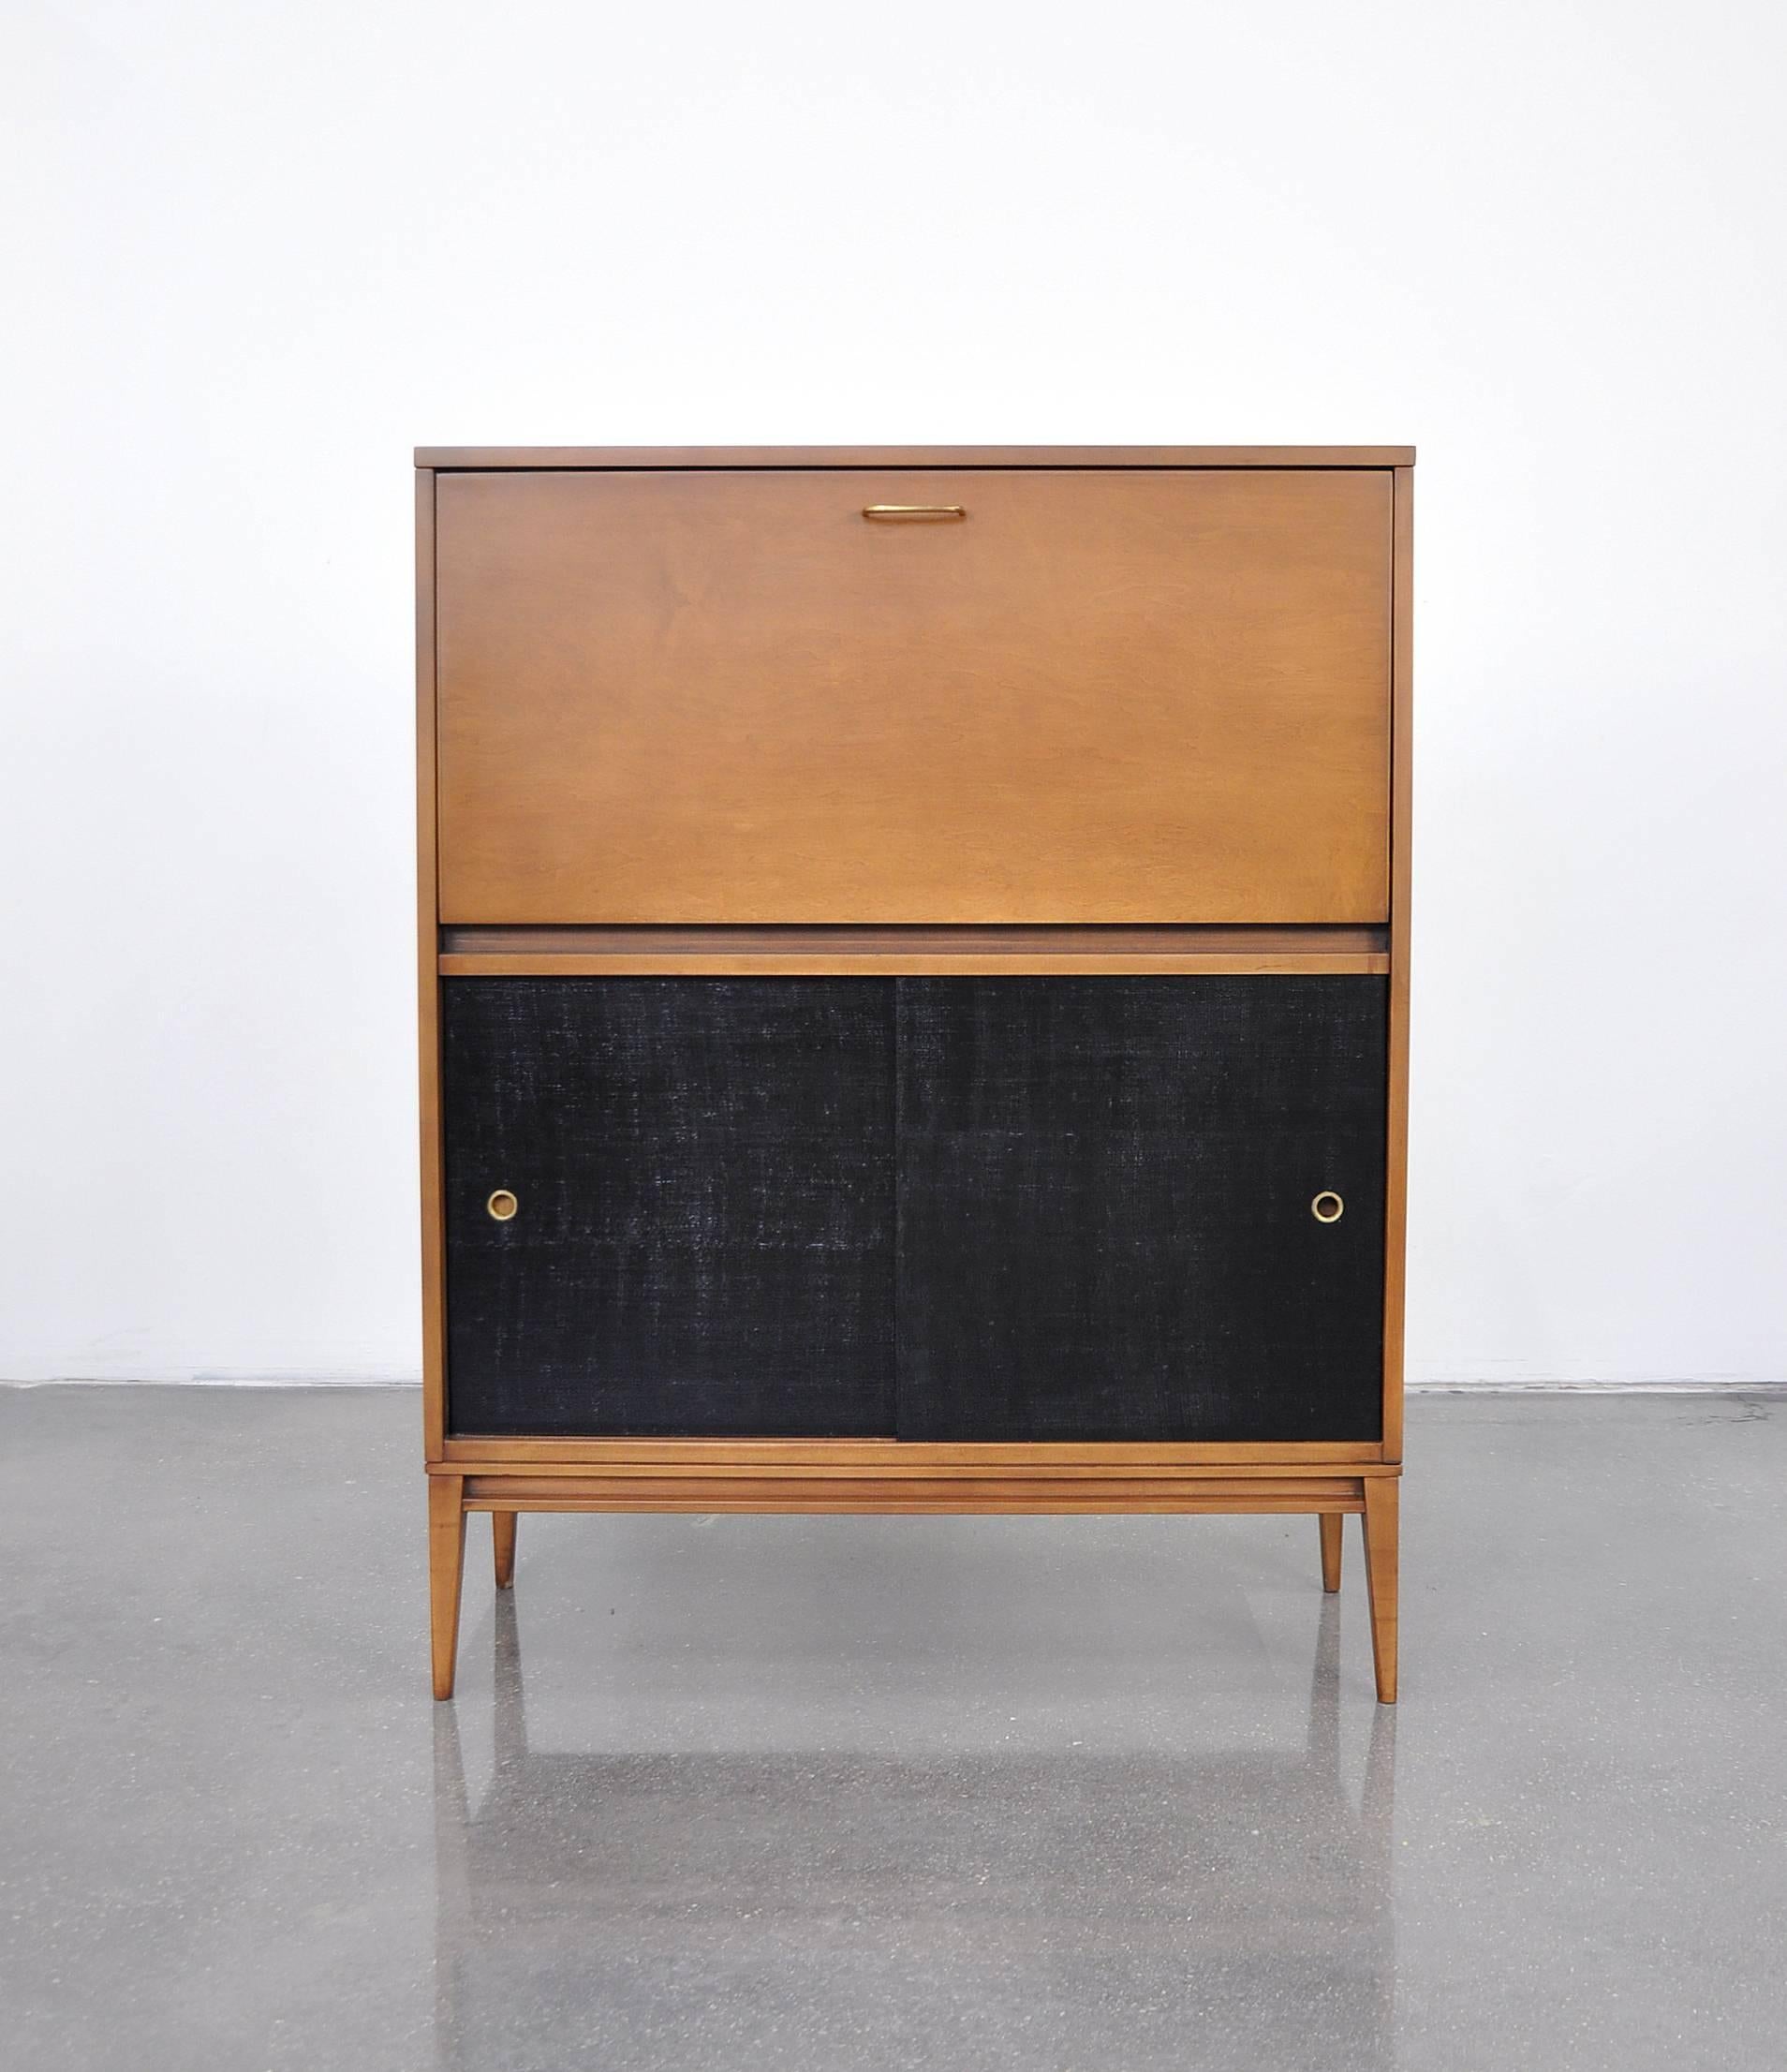 A very nice example of a Mid-Century Modern fall-front secretary designed by Paul McCobb for the Planner Group line, manufactured by Winchendon Furniture in the 1950s. A versatile piece that could be also used as a bar cabinet. Fitted with the